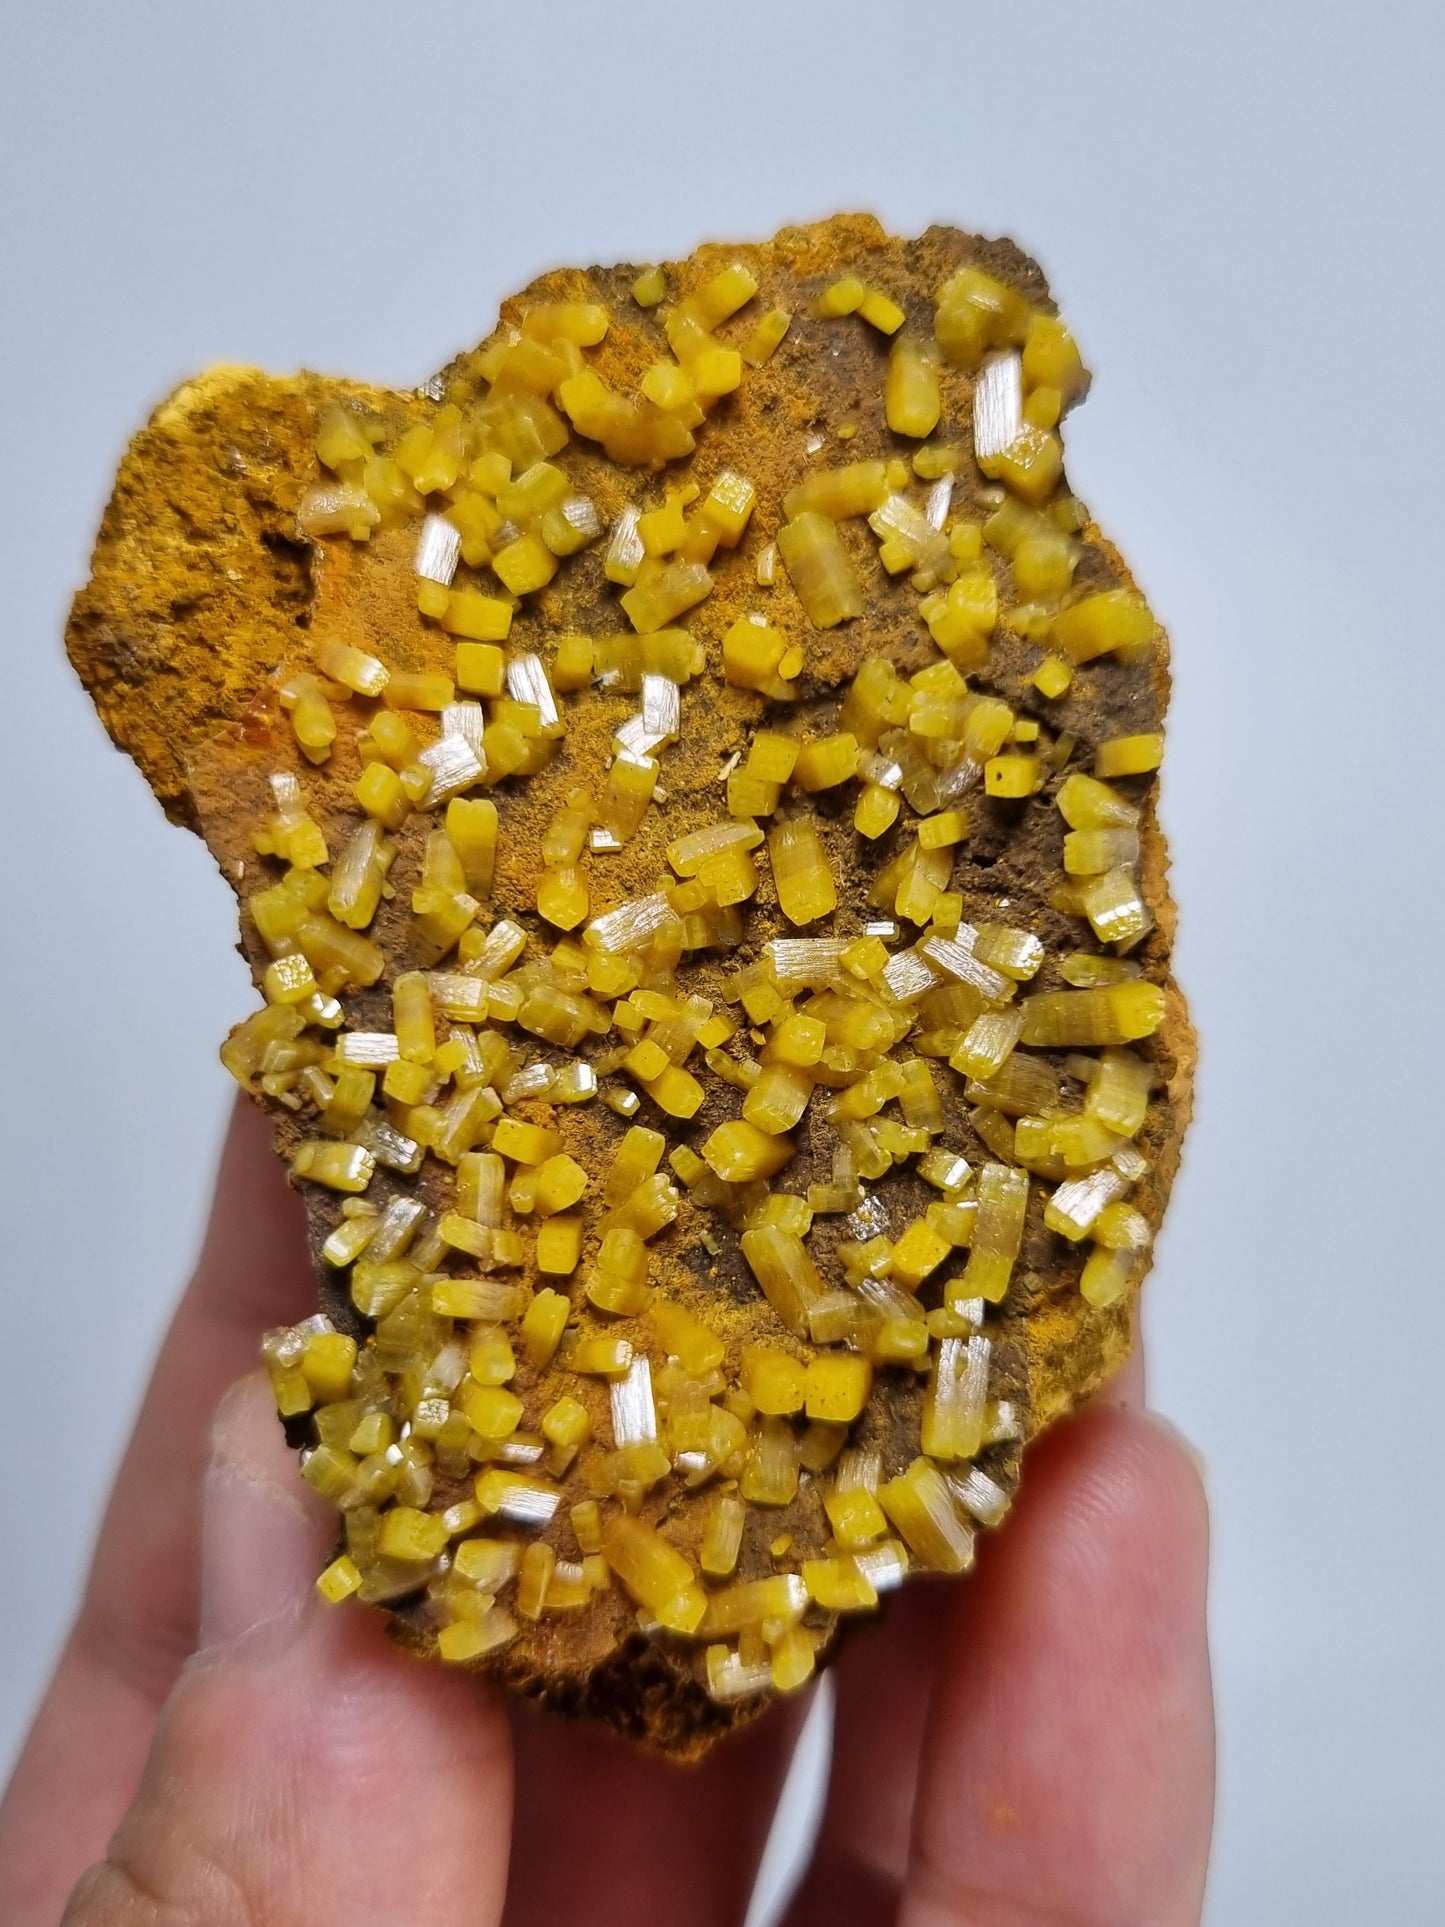 Beautiful Mimetite Crystal Specimen from Mexico